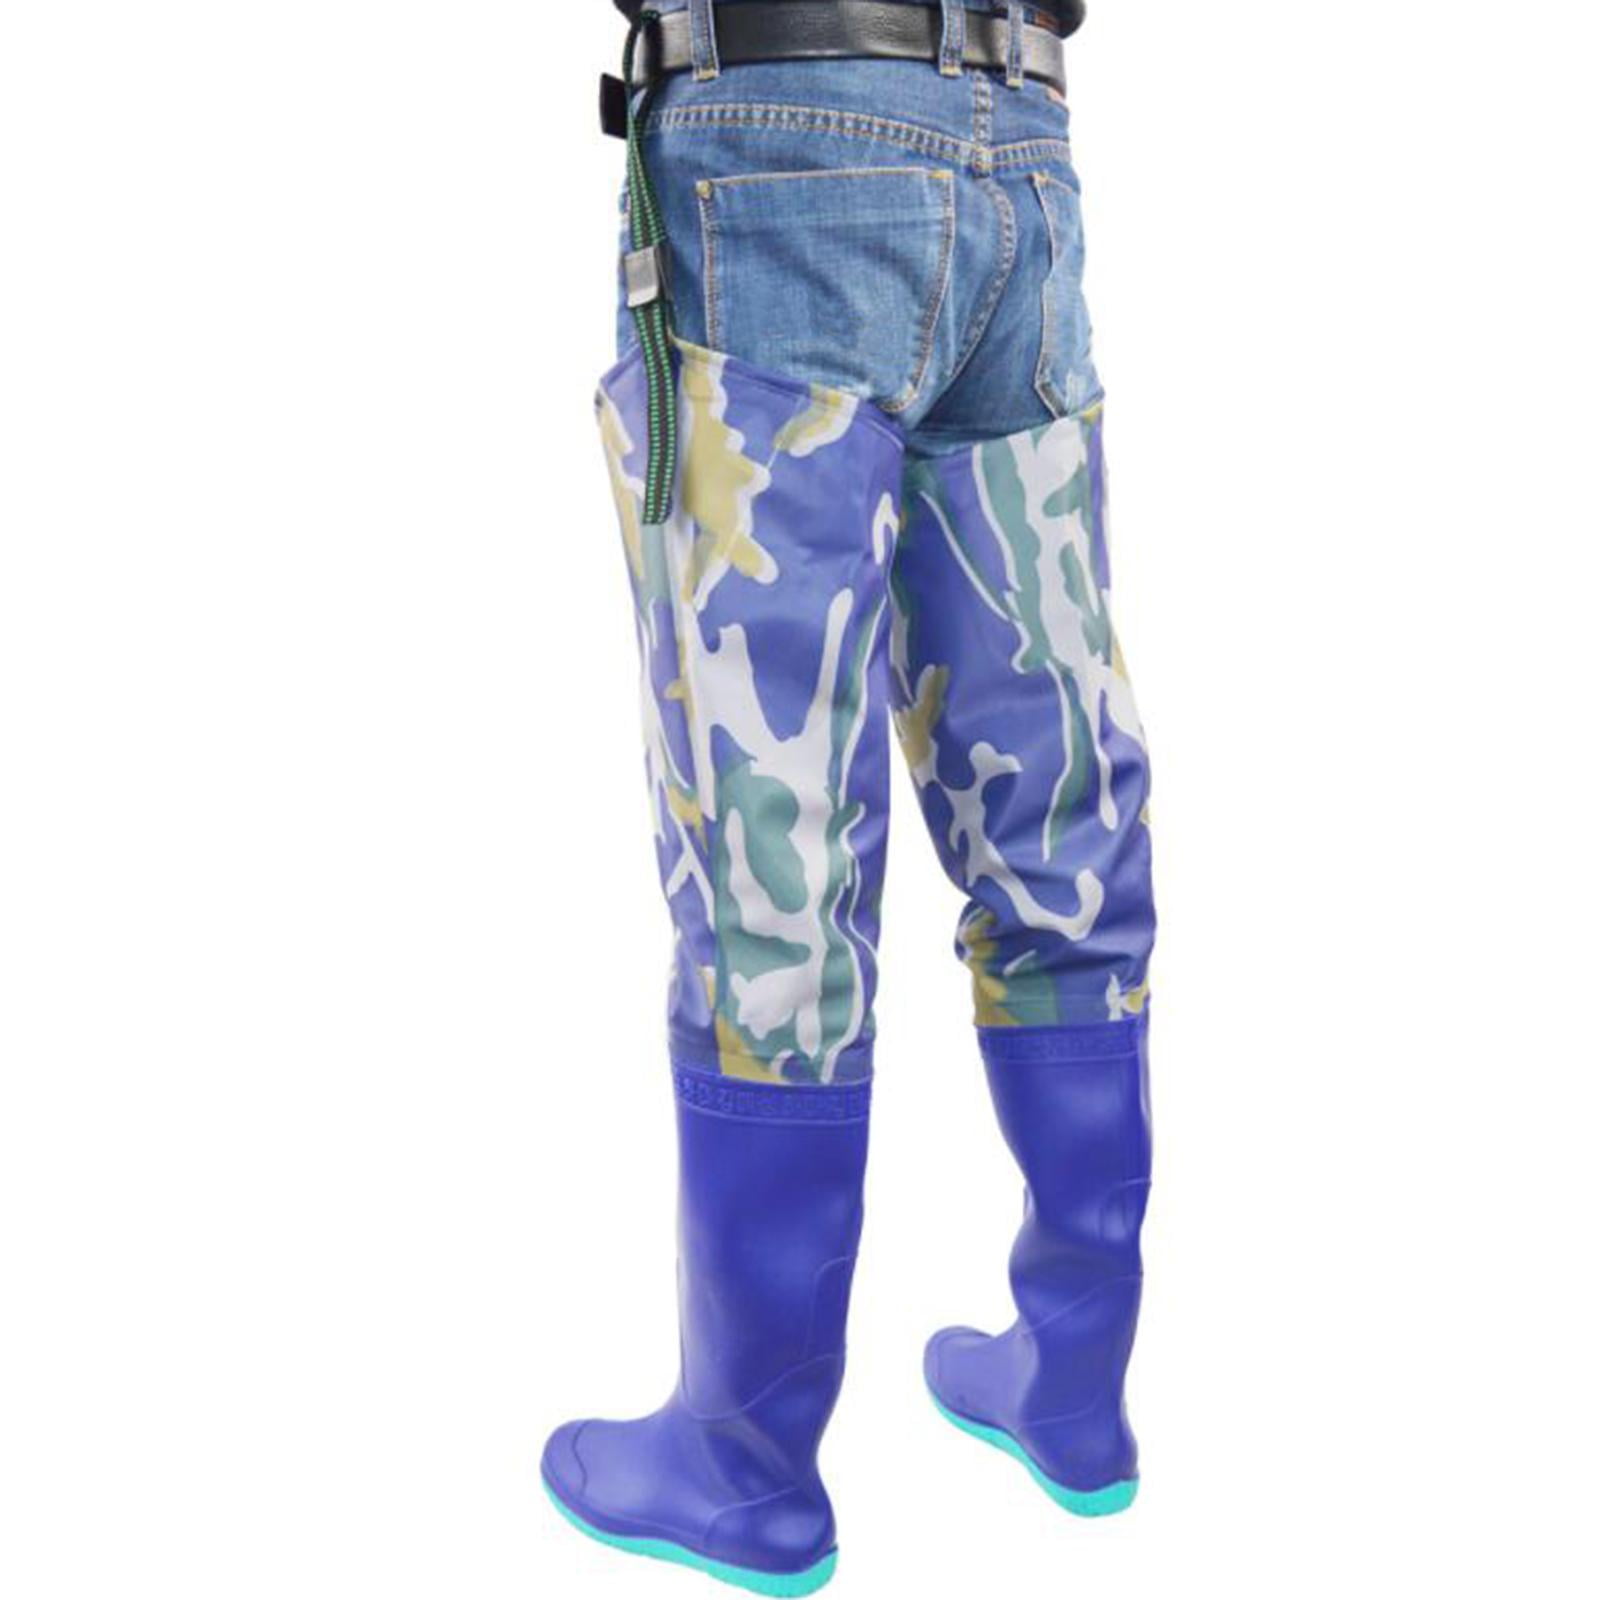  HAIKANGSHOP Neoprene Chest Waders for Women, Waterproof Fishing  Chest Waders,Waterproof Windproof,Sea Fishing Muck Wader (Color : Blue,  Size : 40) : Sports & Outdoors